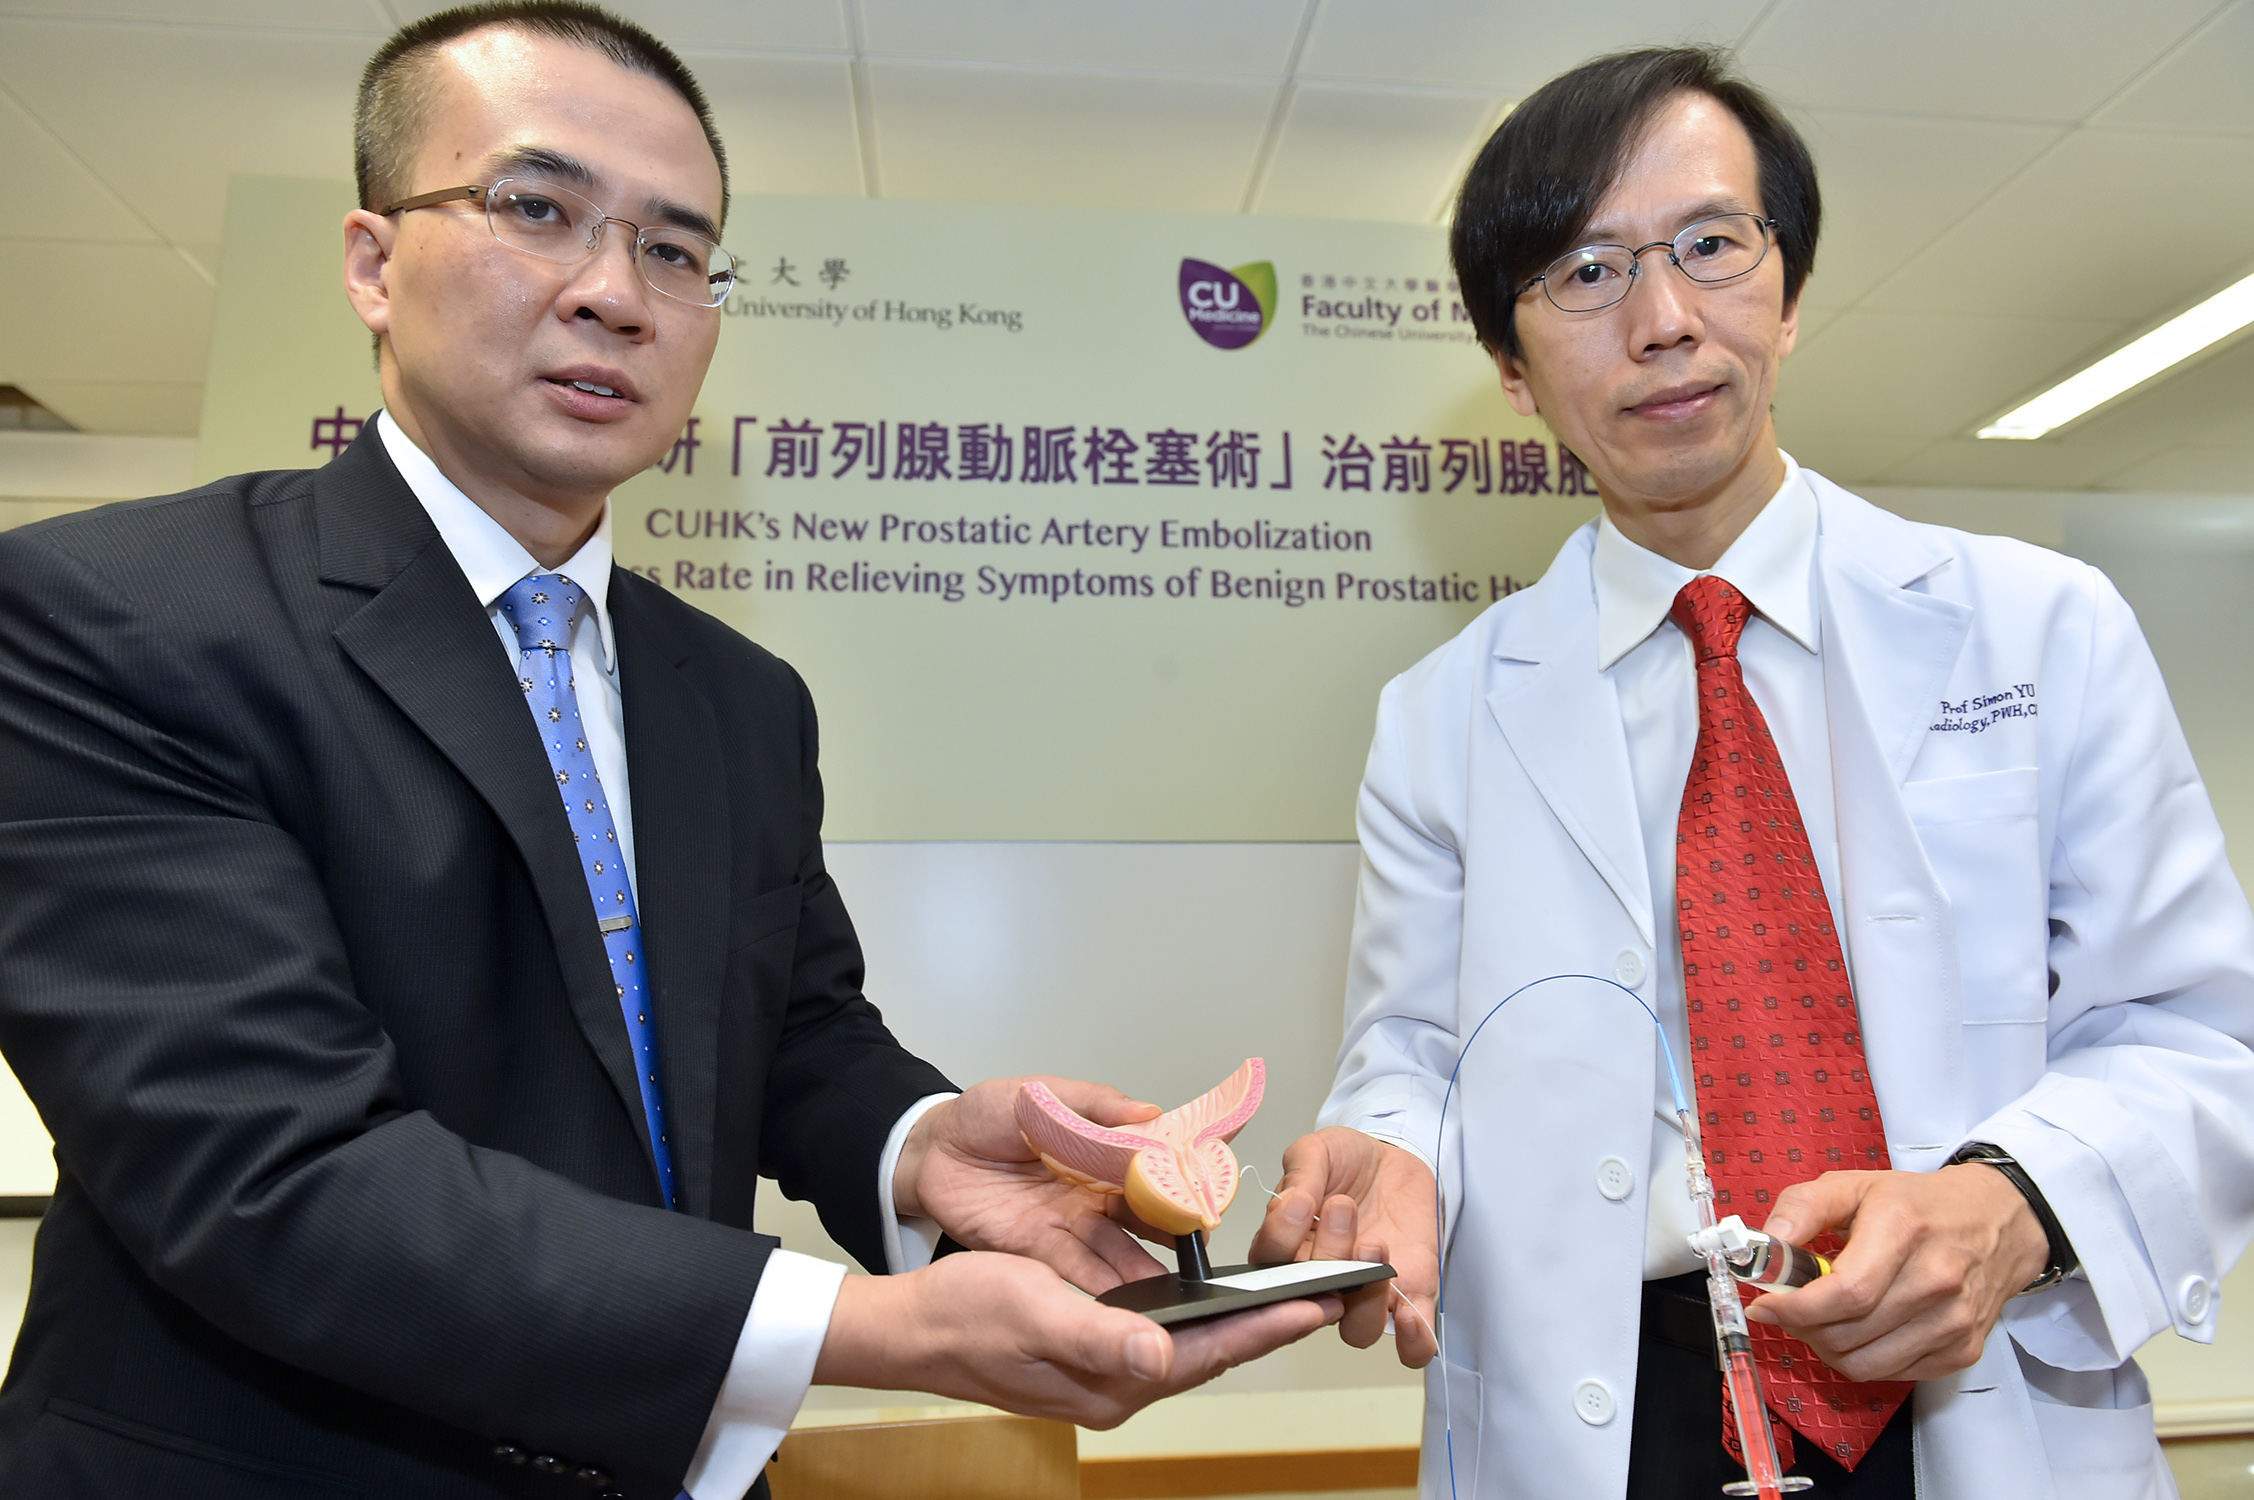 Professor Yu and Professor Ng showcase the microspheres and catheter using in PAE.